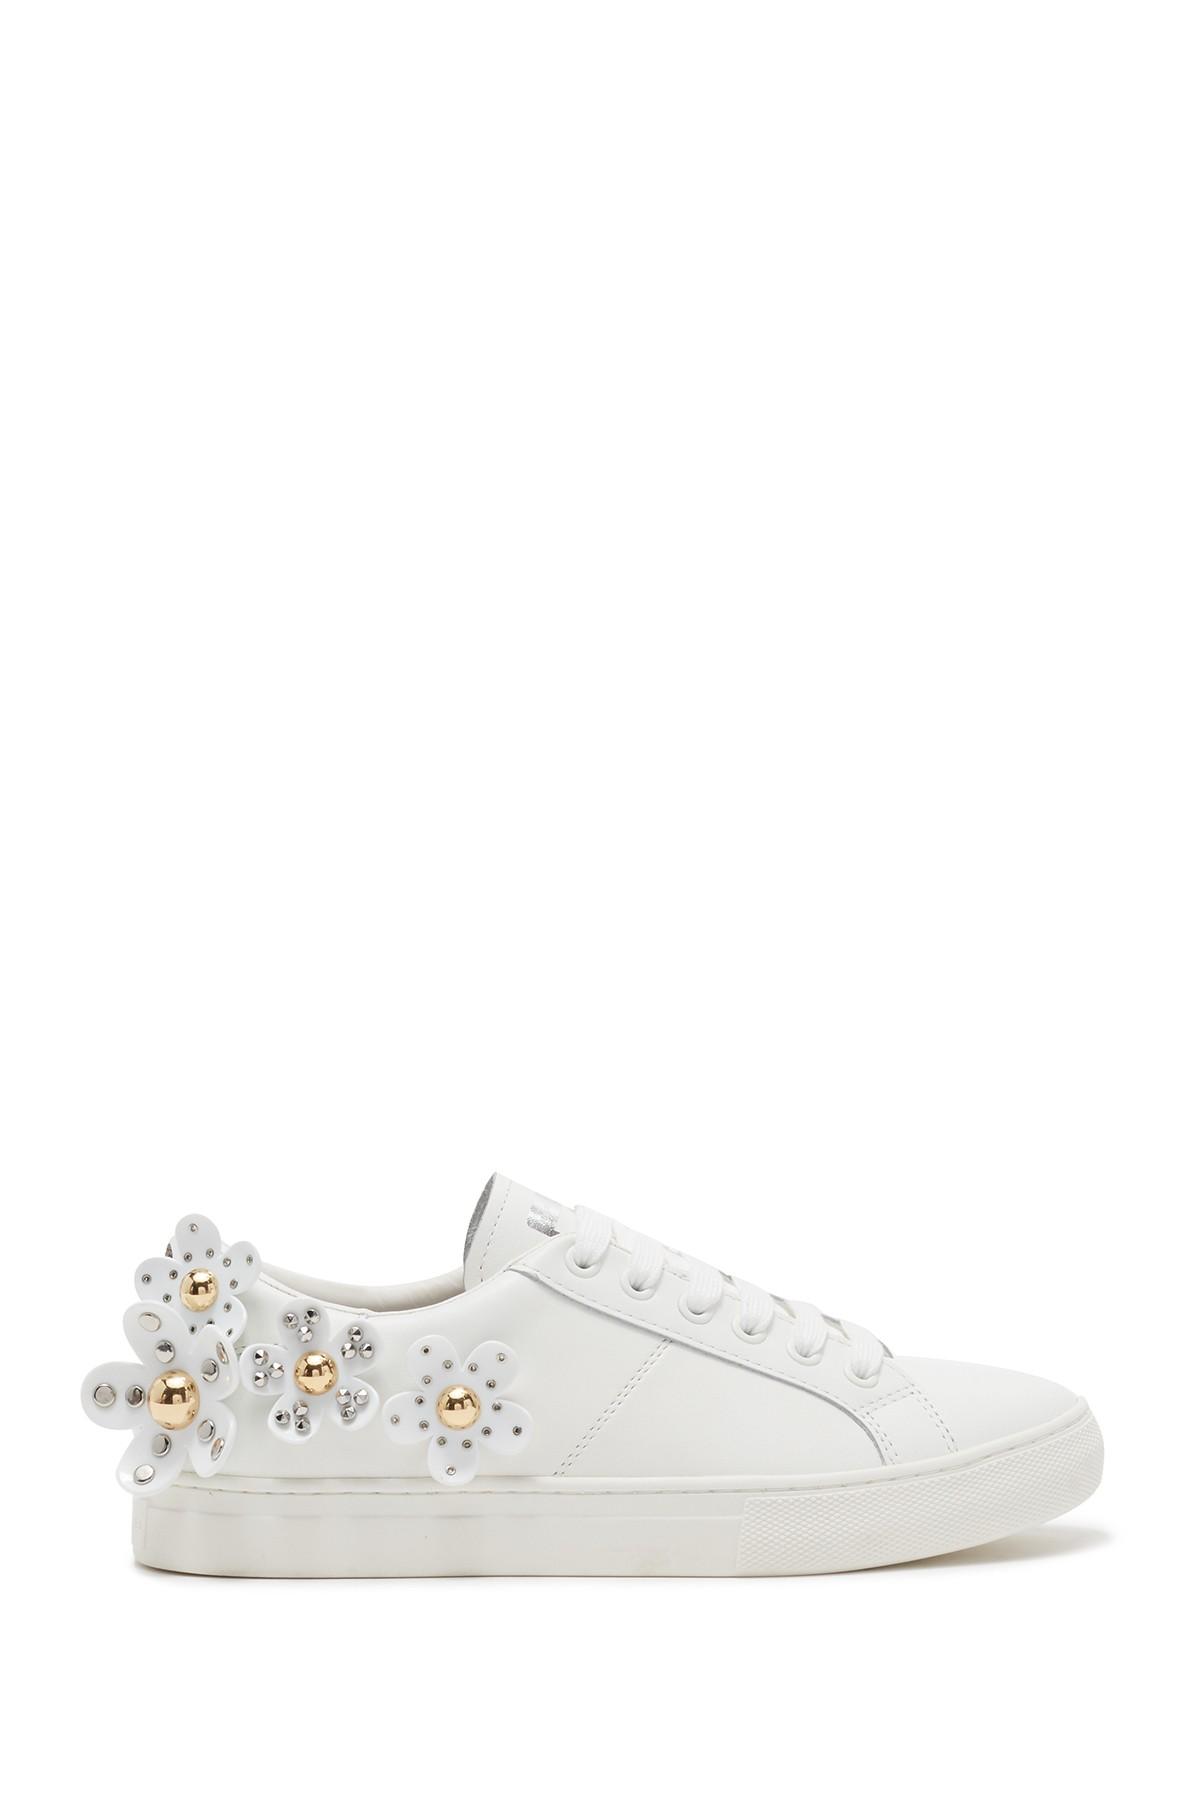 Marc Jacobs Leather Daisy Studded Floral Sneaker in White - Lyst